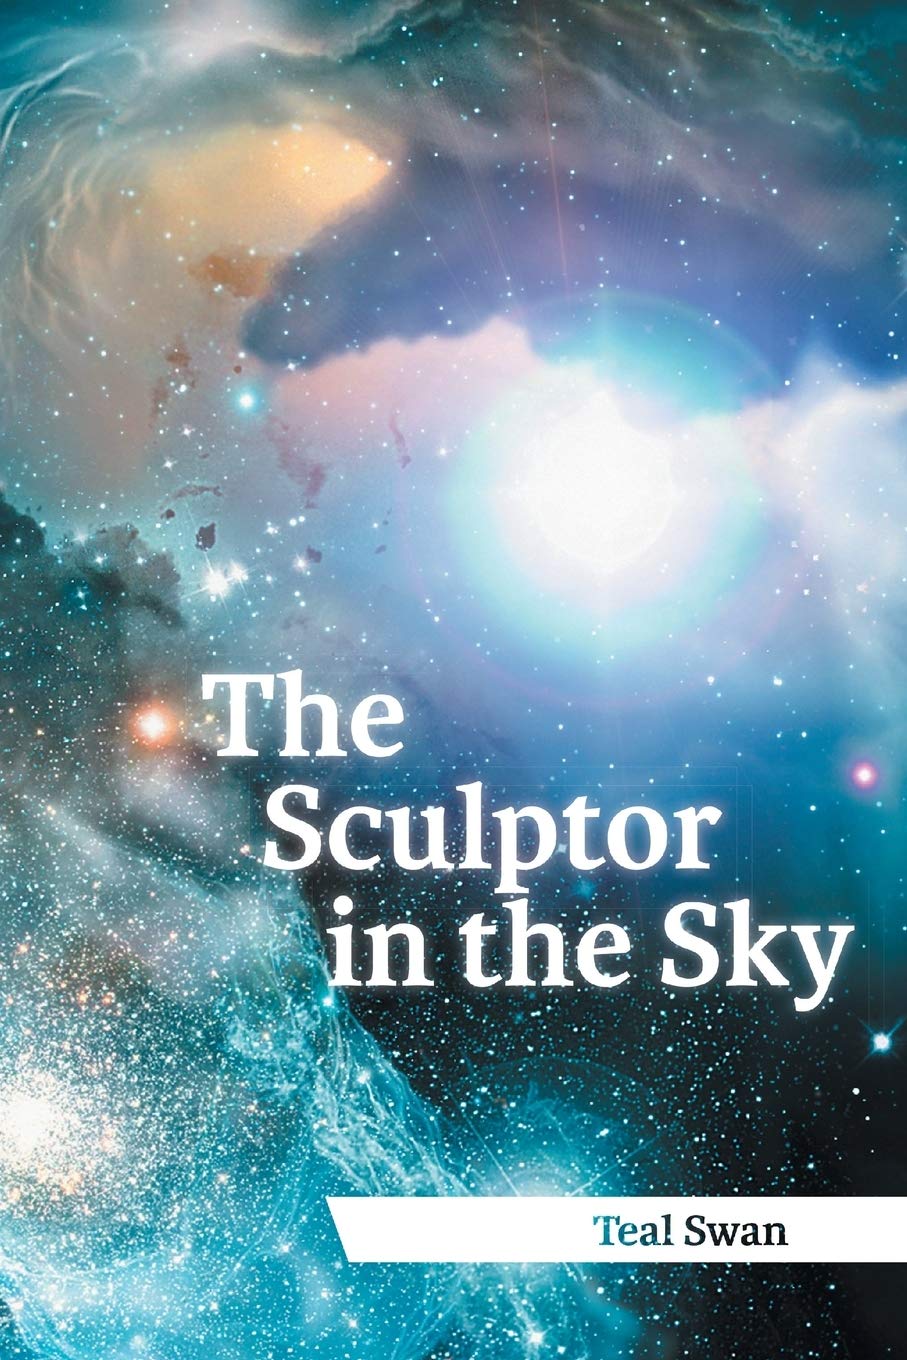 shop-online-and-get-your-favourite-the-sculptor-in-the-sky-audiobook-on-sale_0.jpg